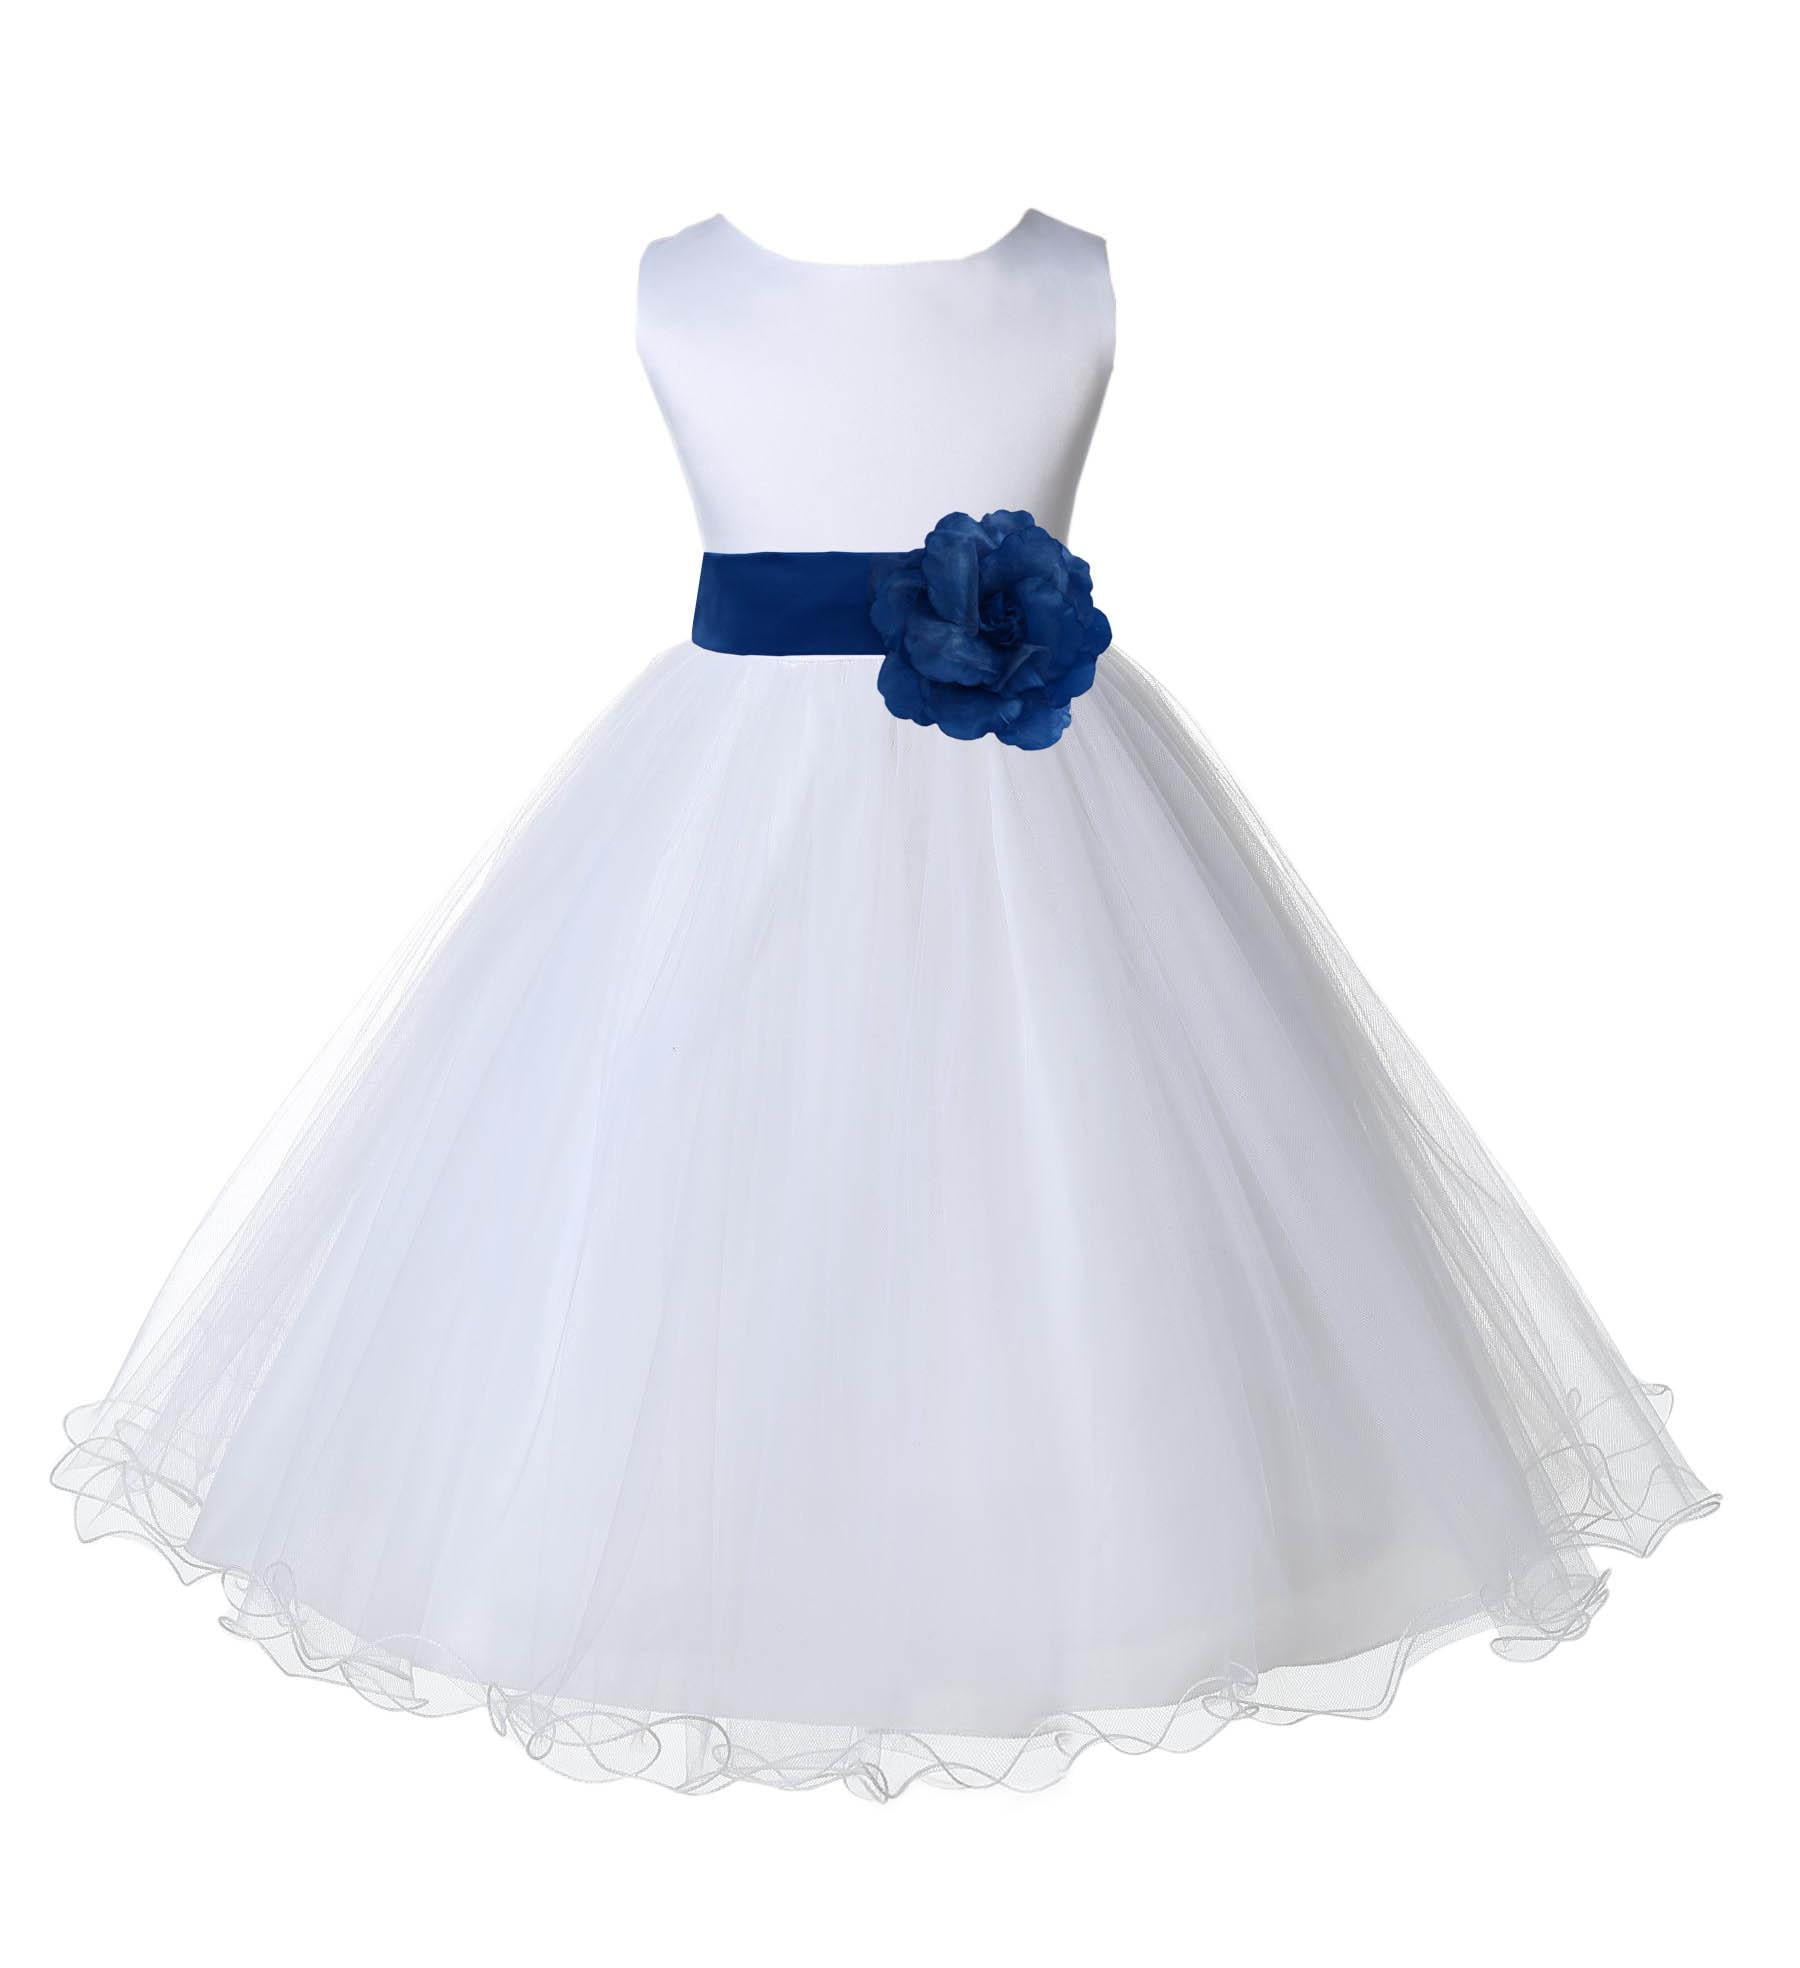 Kids Flower Girl Dress Princess Bow Wedding Pageant Communion Baptism Party Gown 